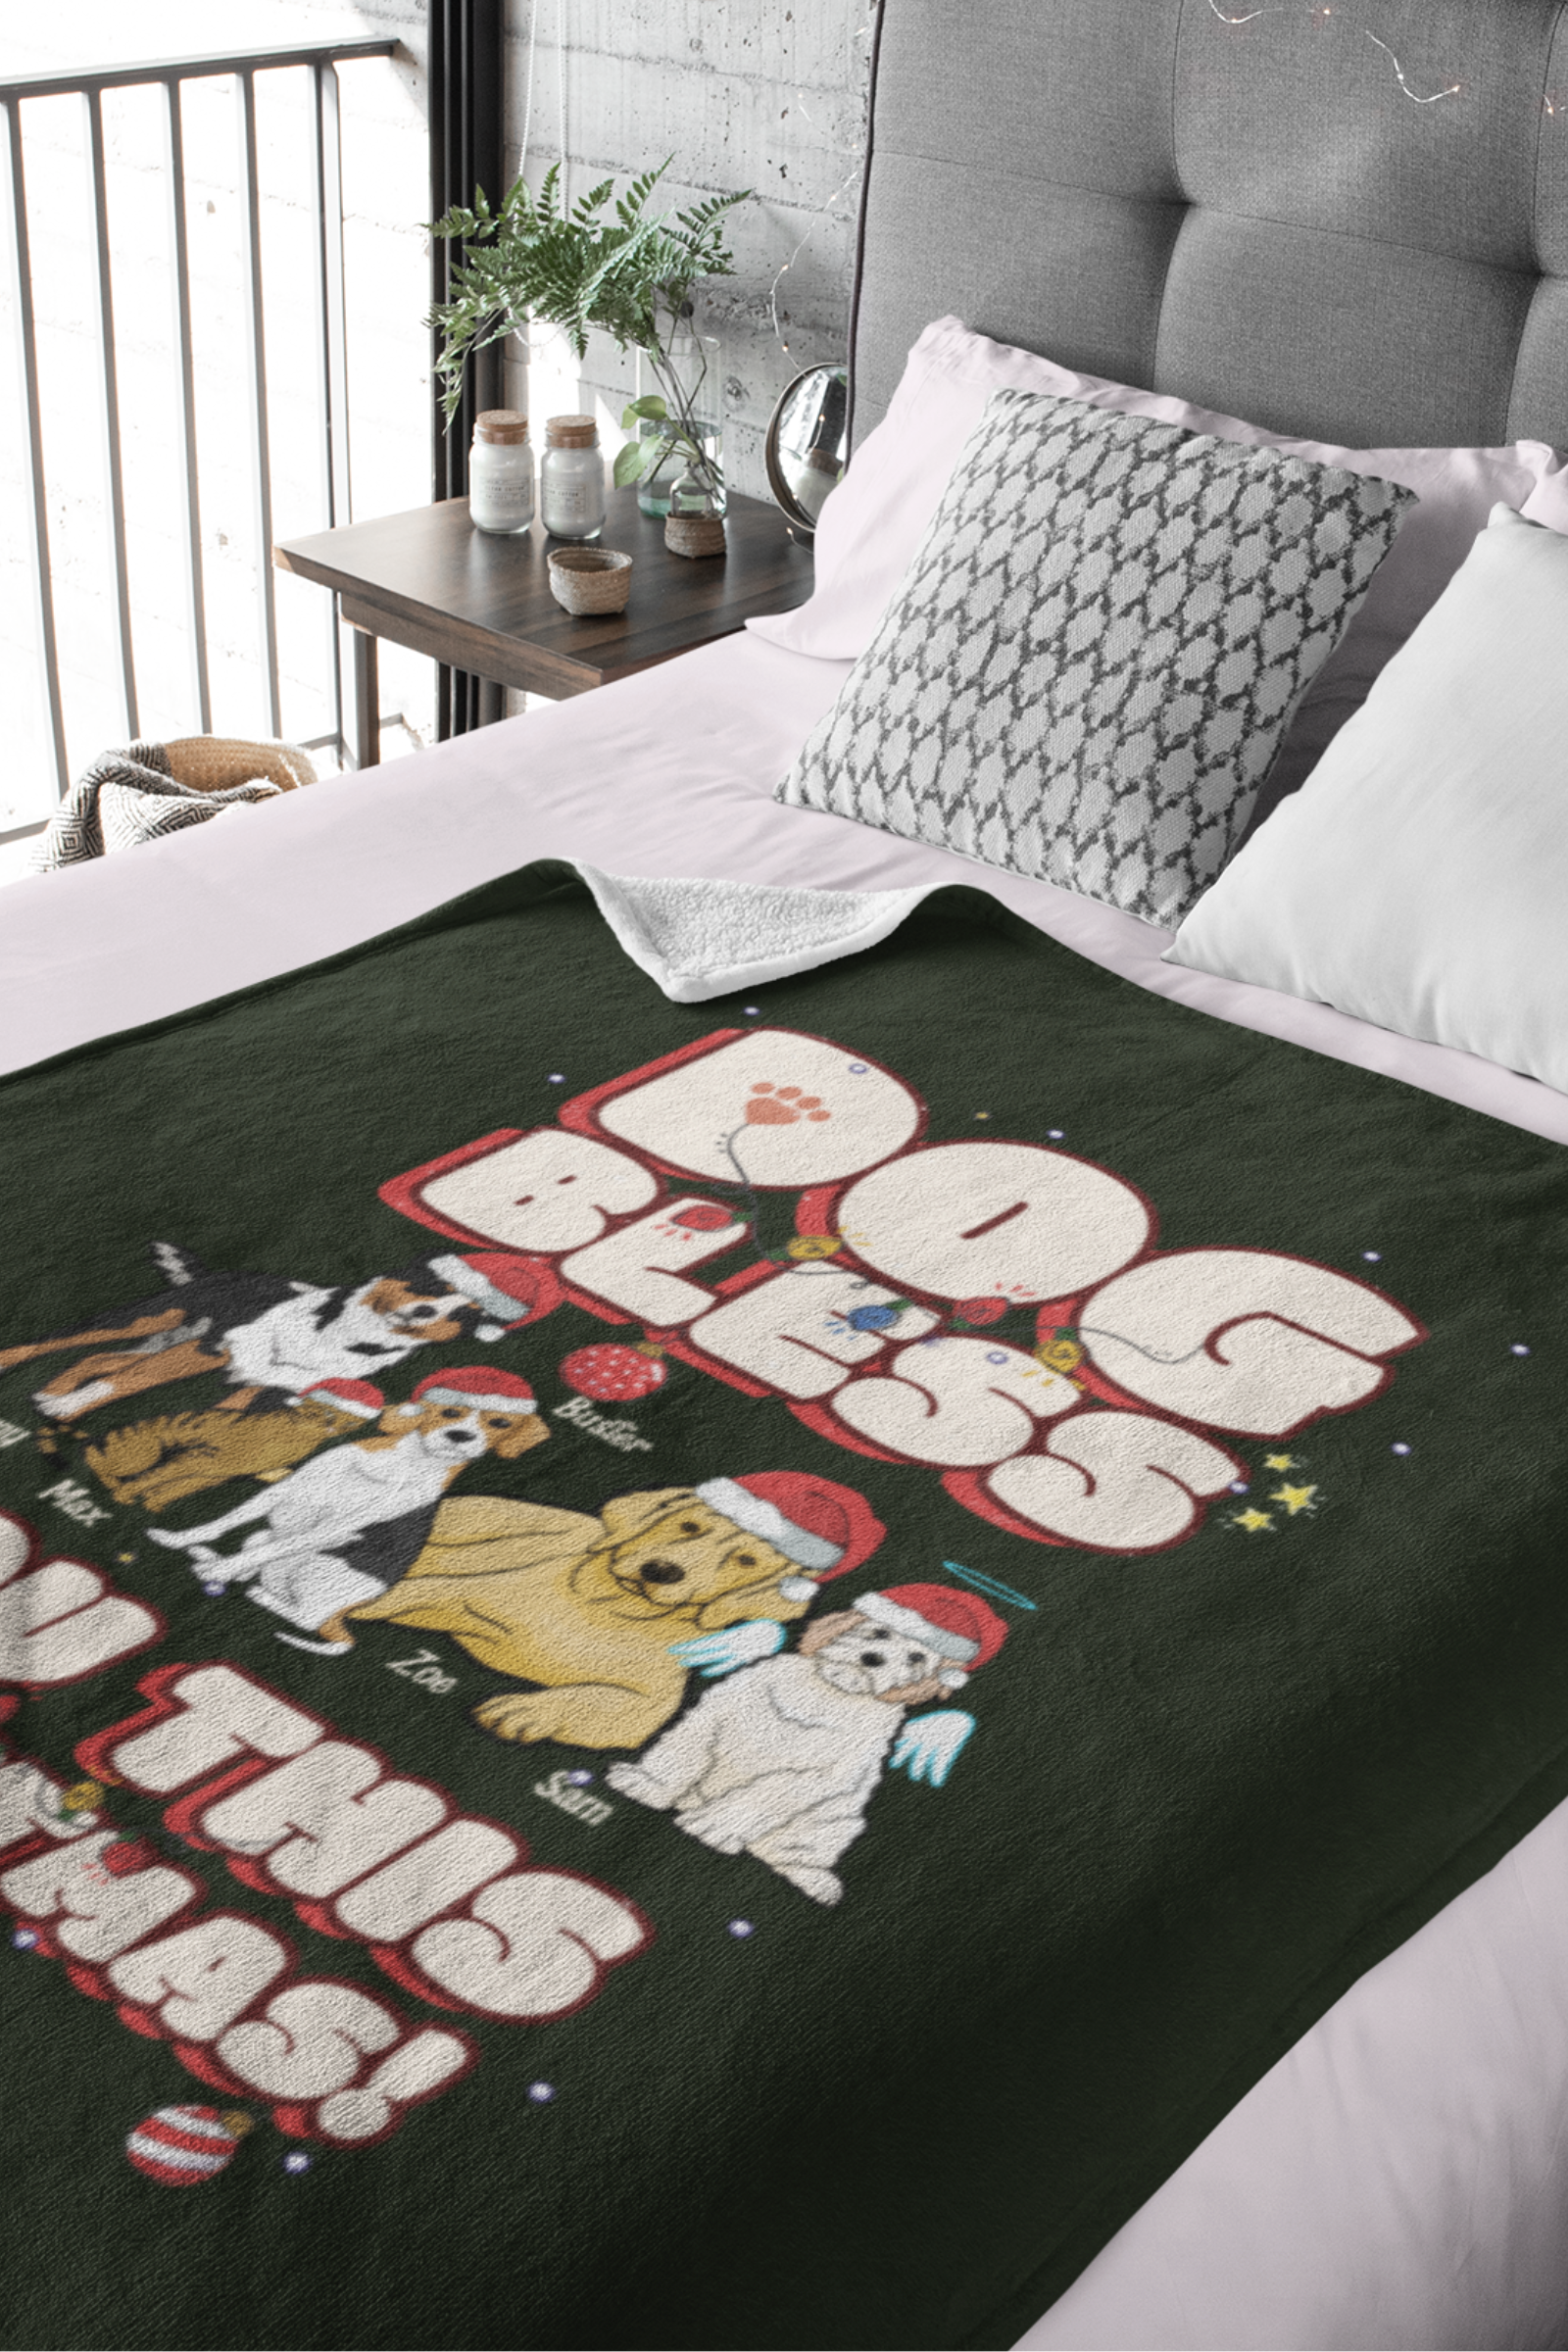 Dog Bless You This Christmas Personalized Blanket for Pet Lovers